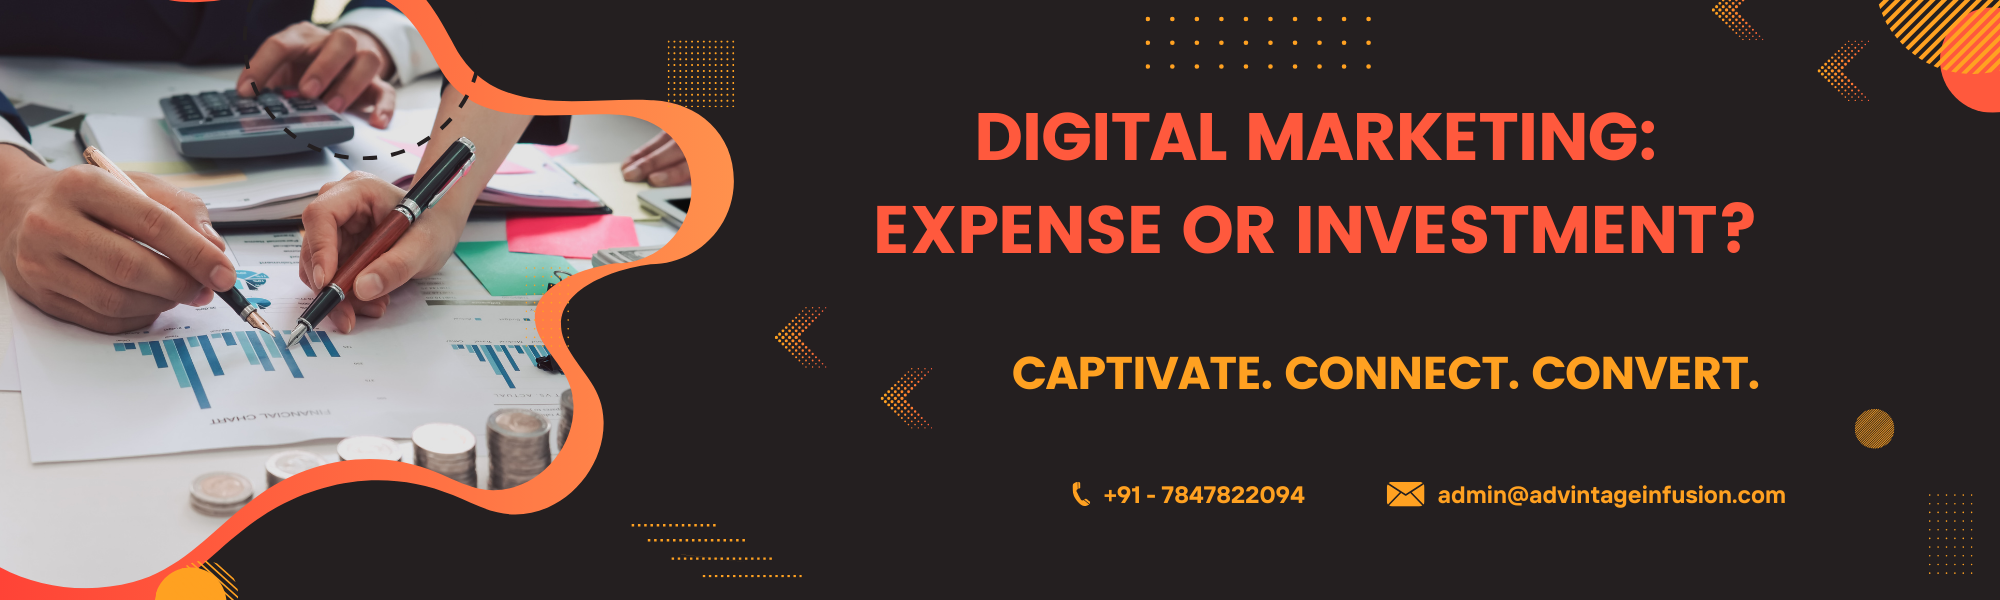 Digital Marketing: Expense or Investment?